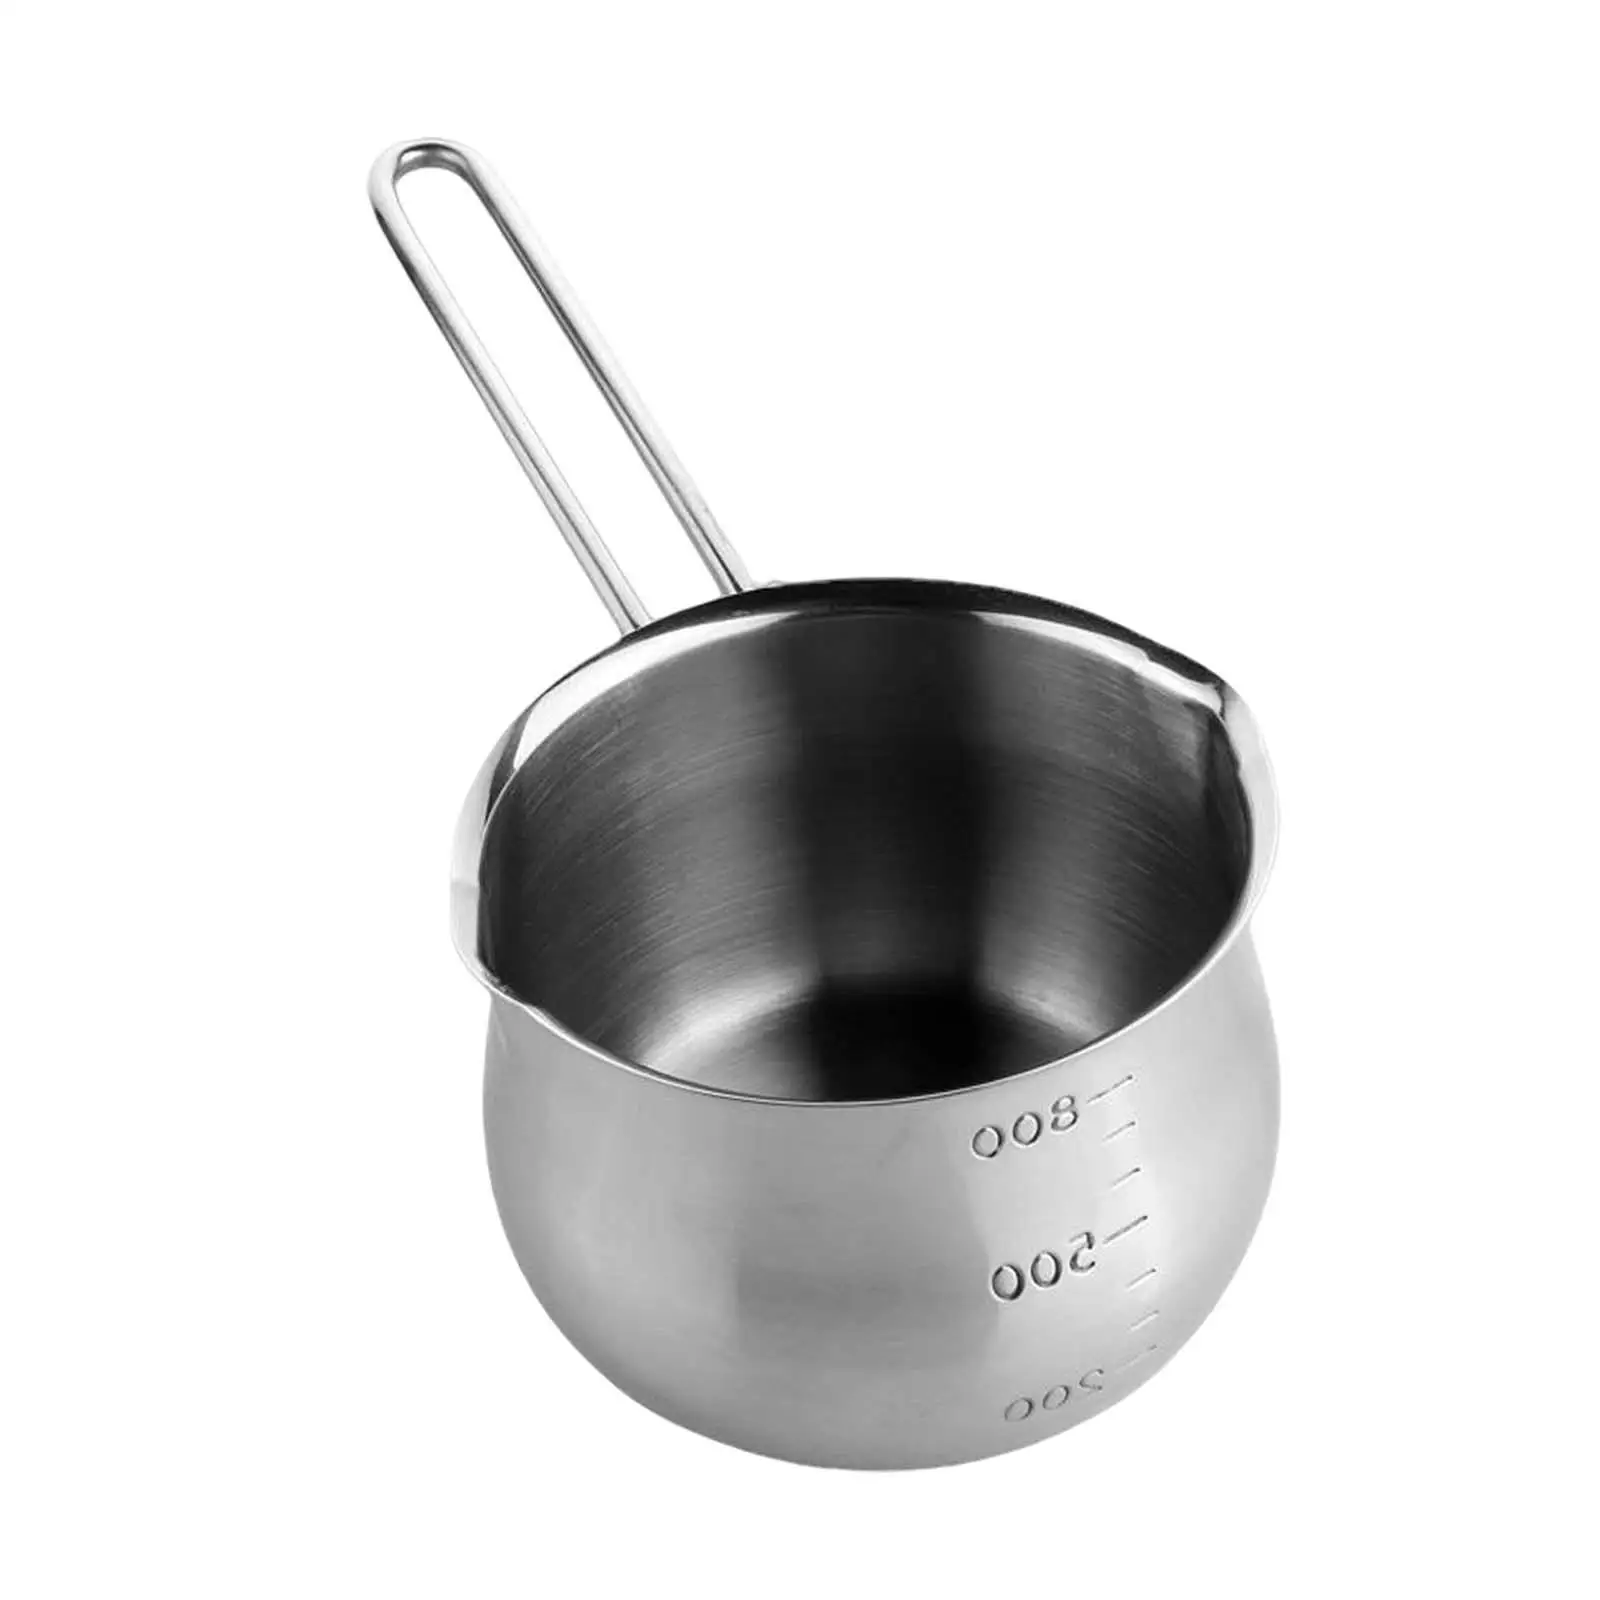 Stainless Steel Small Milk Pot Butter Warmer for Camping Household